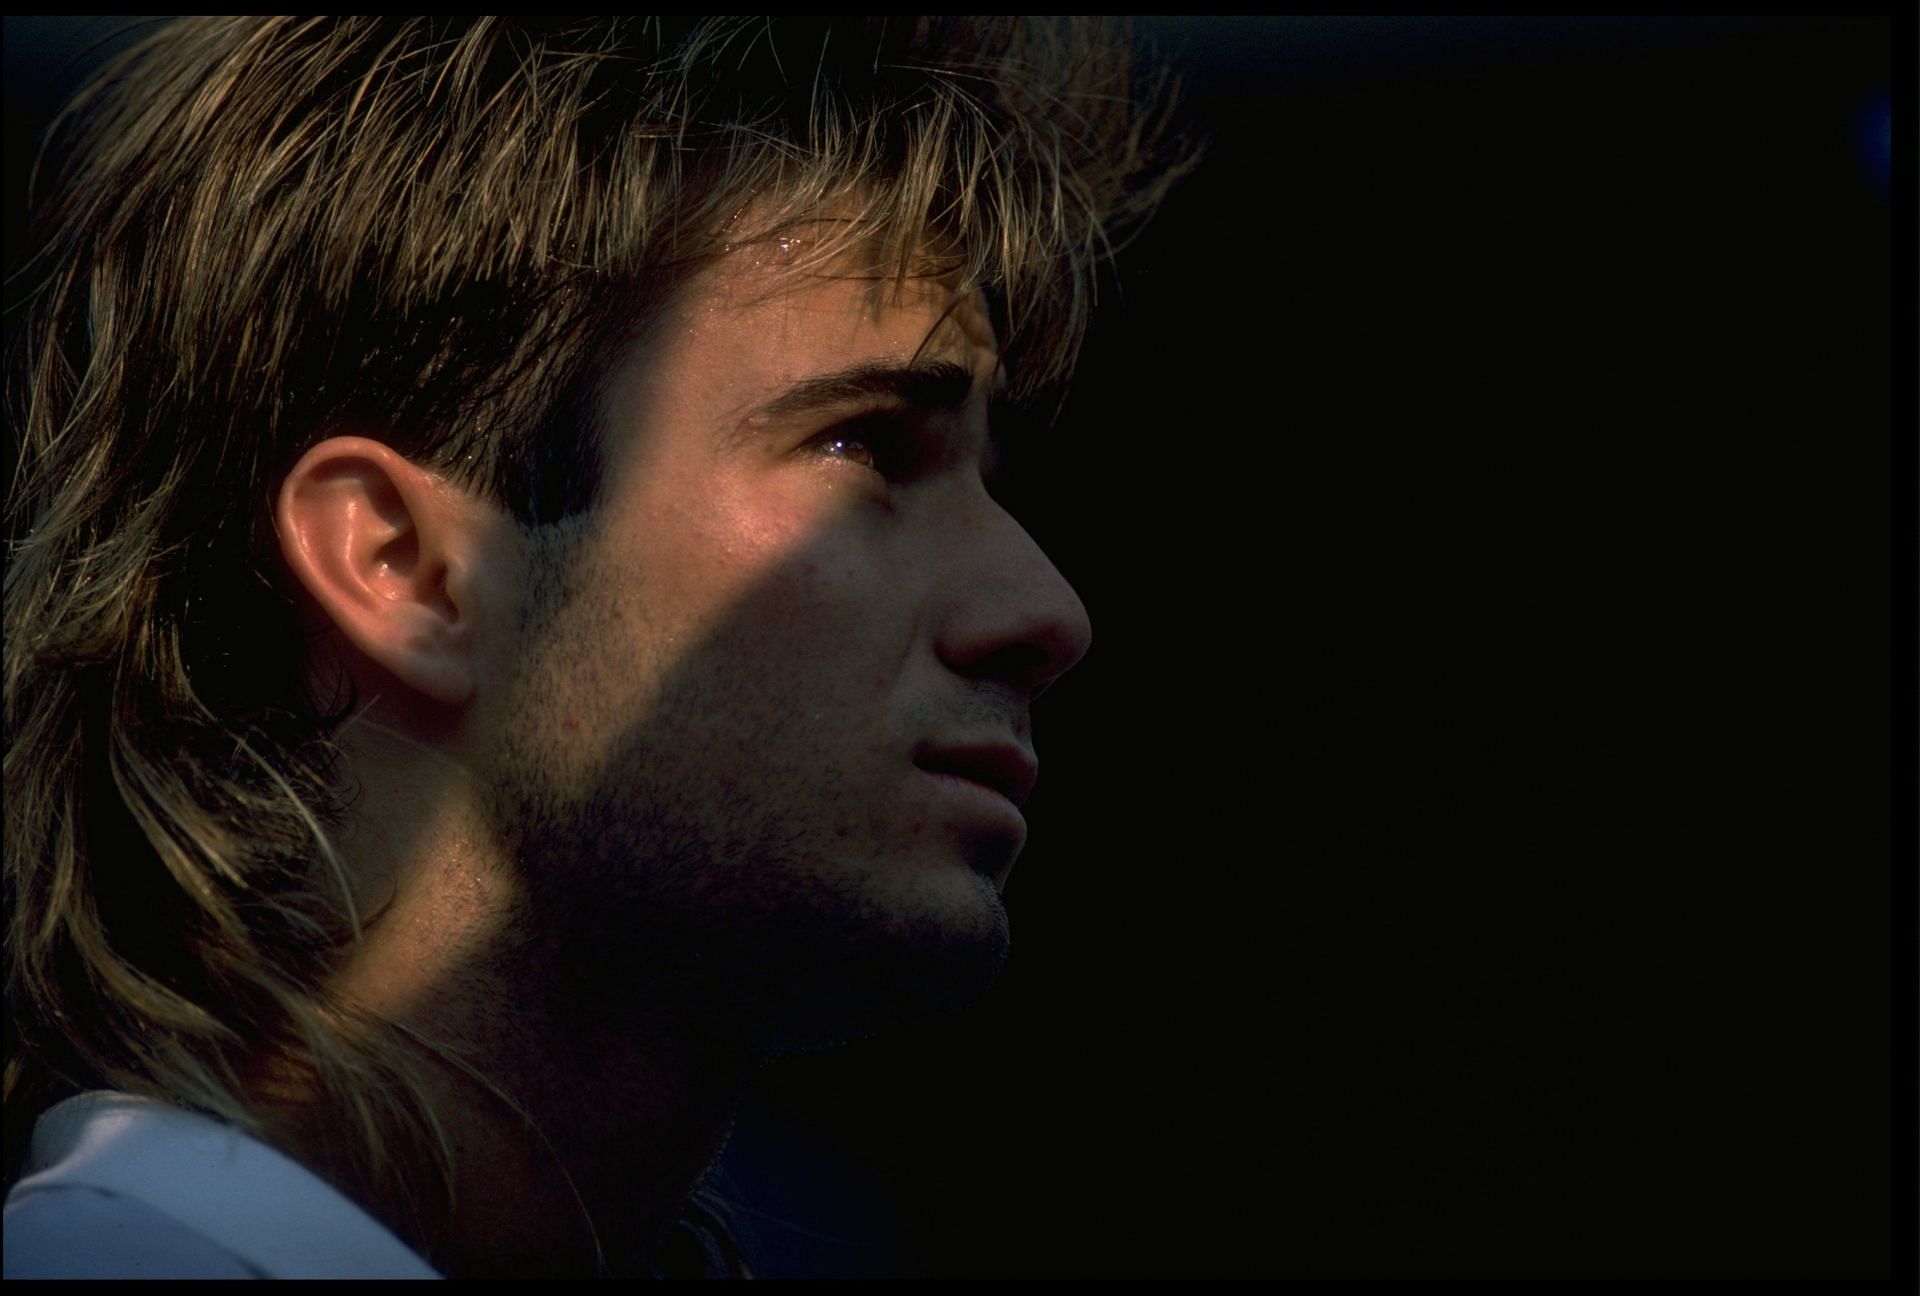 Andre Agassi in the US Open 1988